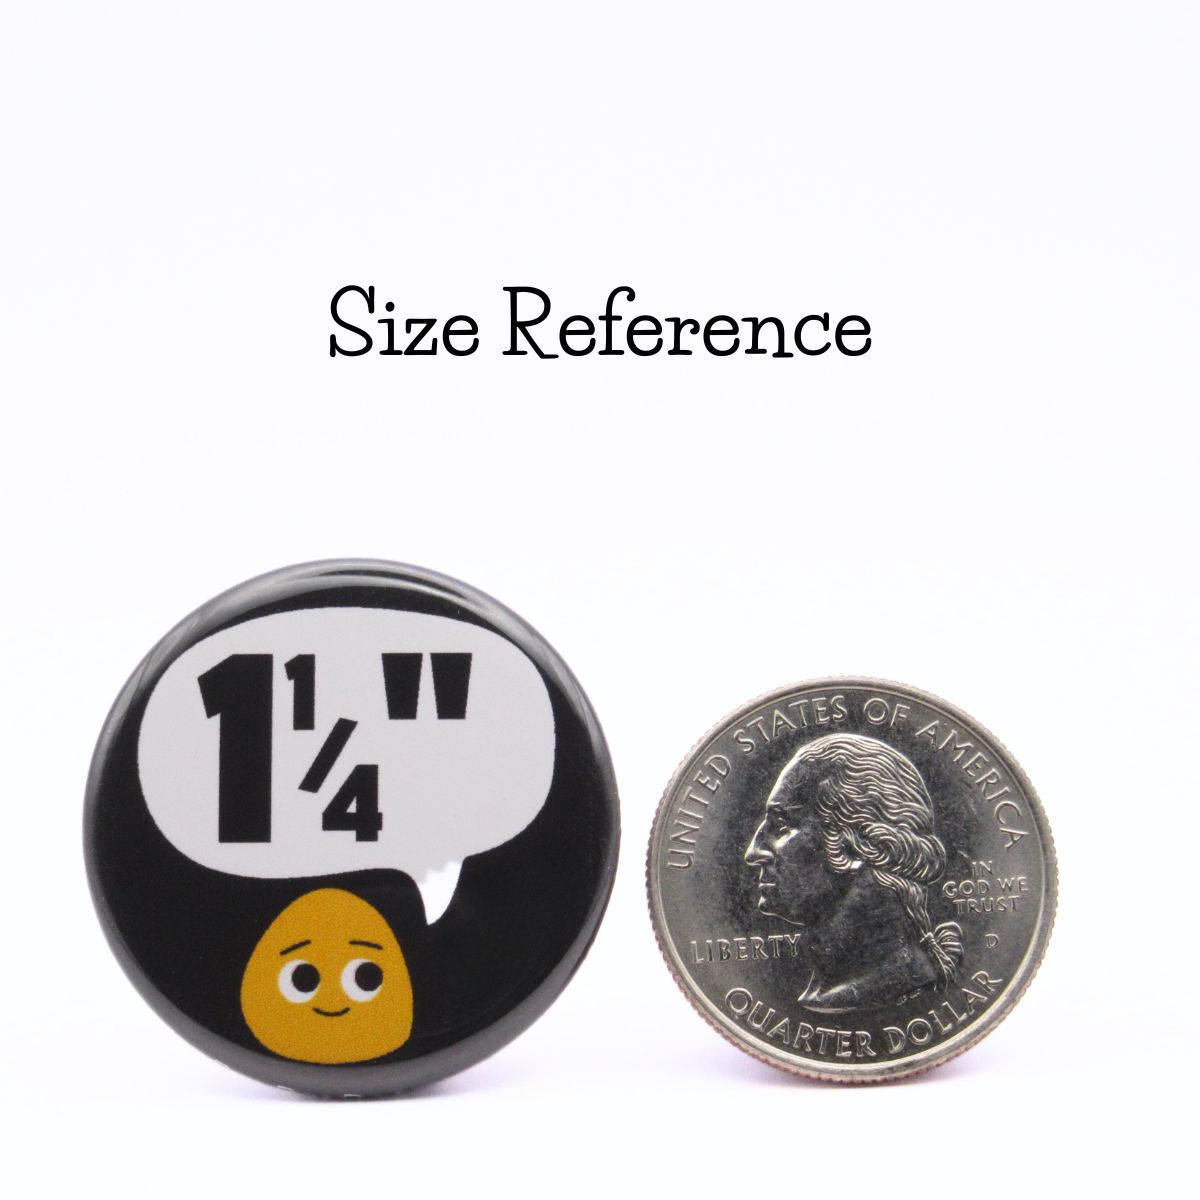 BooBooRoo pinback button (i.e. button, badge, pin) showing relative size of 1 and one quarter inch button